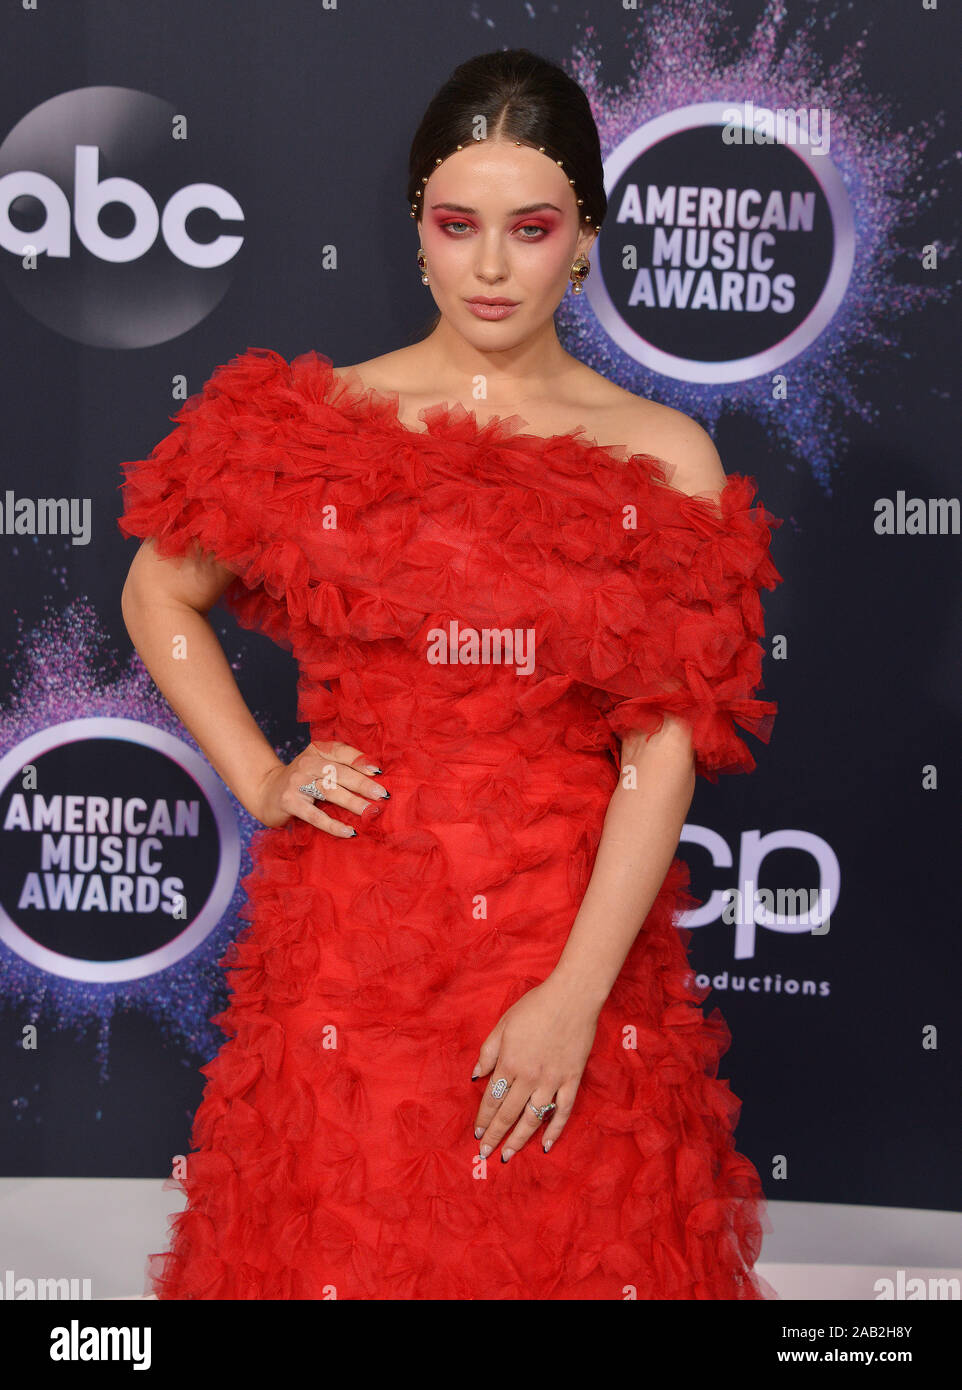 Los Angeles, USA. 24th Nov, 2019. Katherine Langford 303 attends the 2019 American Music Awards at Microsoft Theater on November 24, 2019 in Los Angeles, California Credit: Tsuni/USA/Alamy Live News Stock Photo